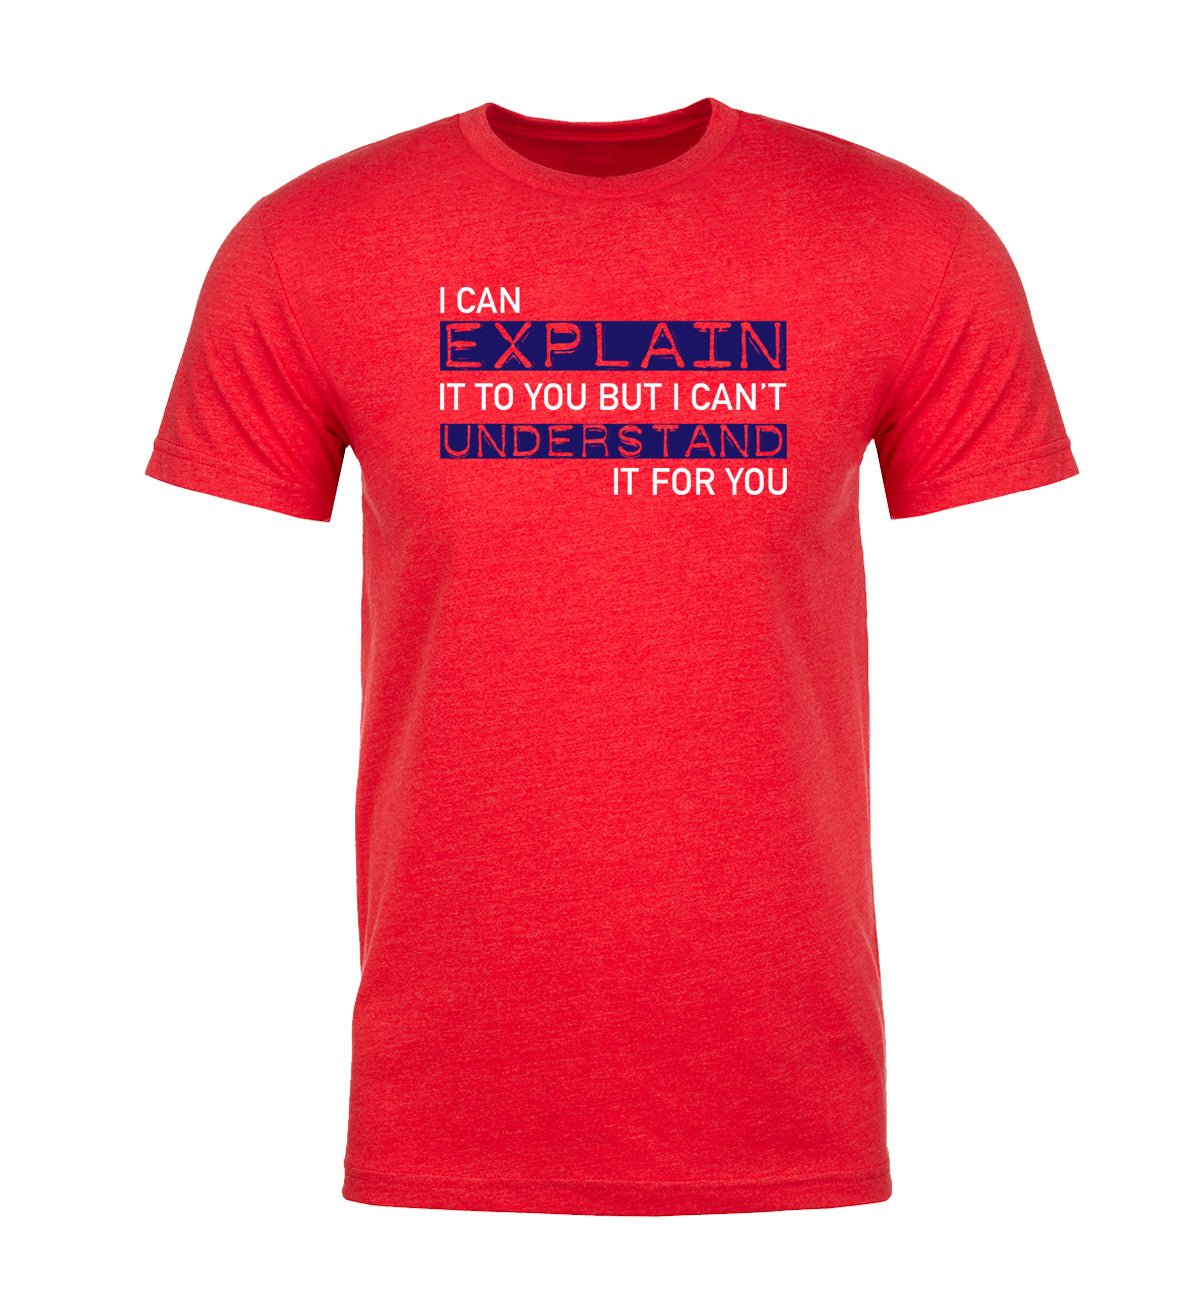 I Can Explain It to You but I Can’t Understand It for You Unisex T Shirts - Mato & Hash